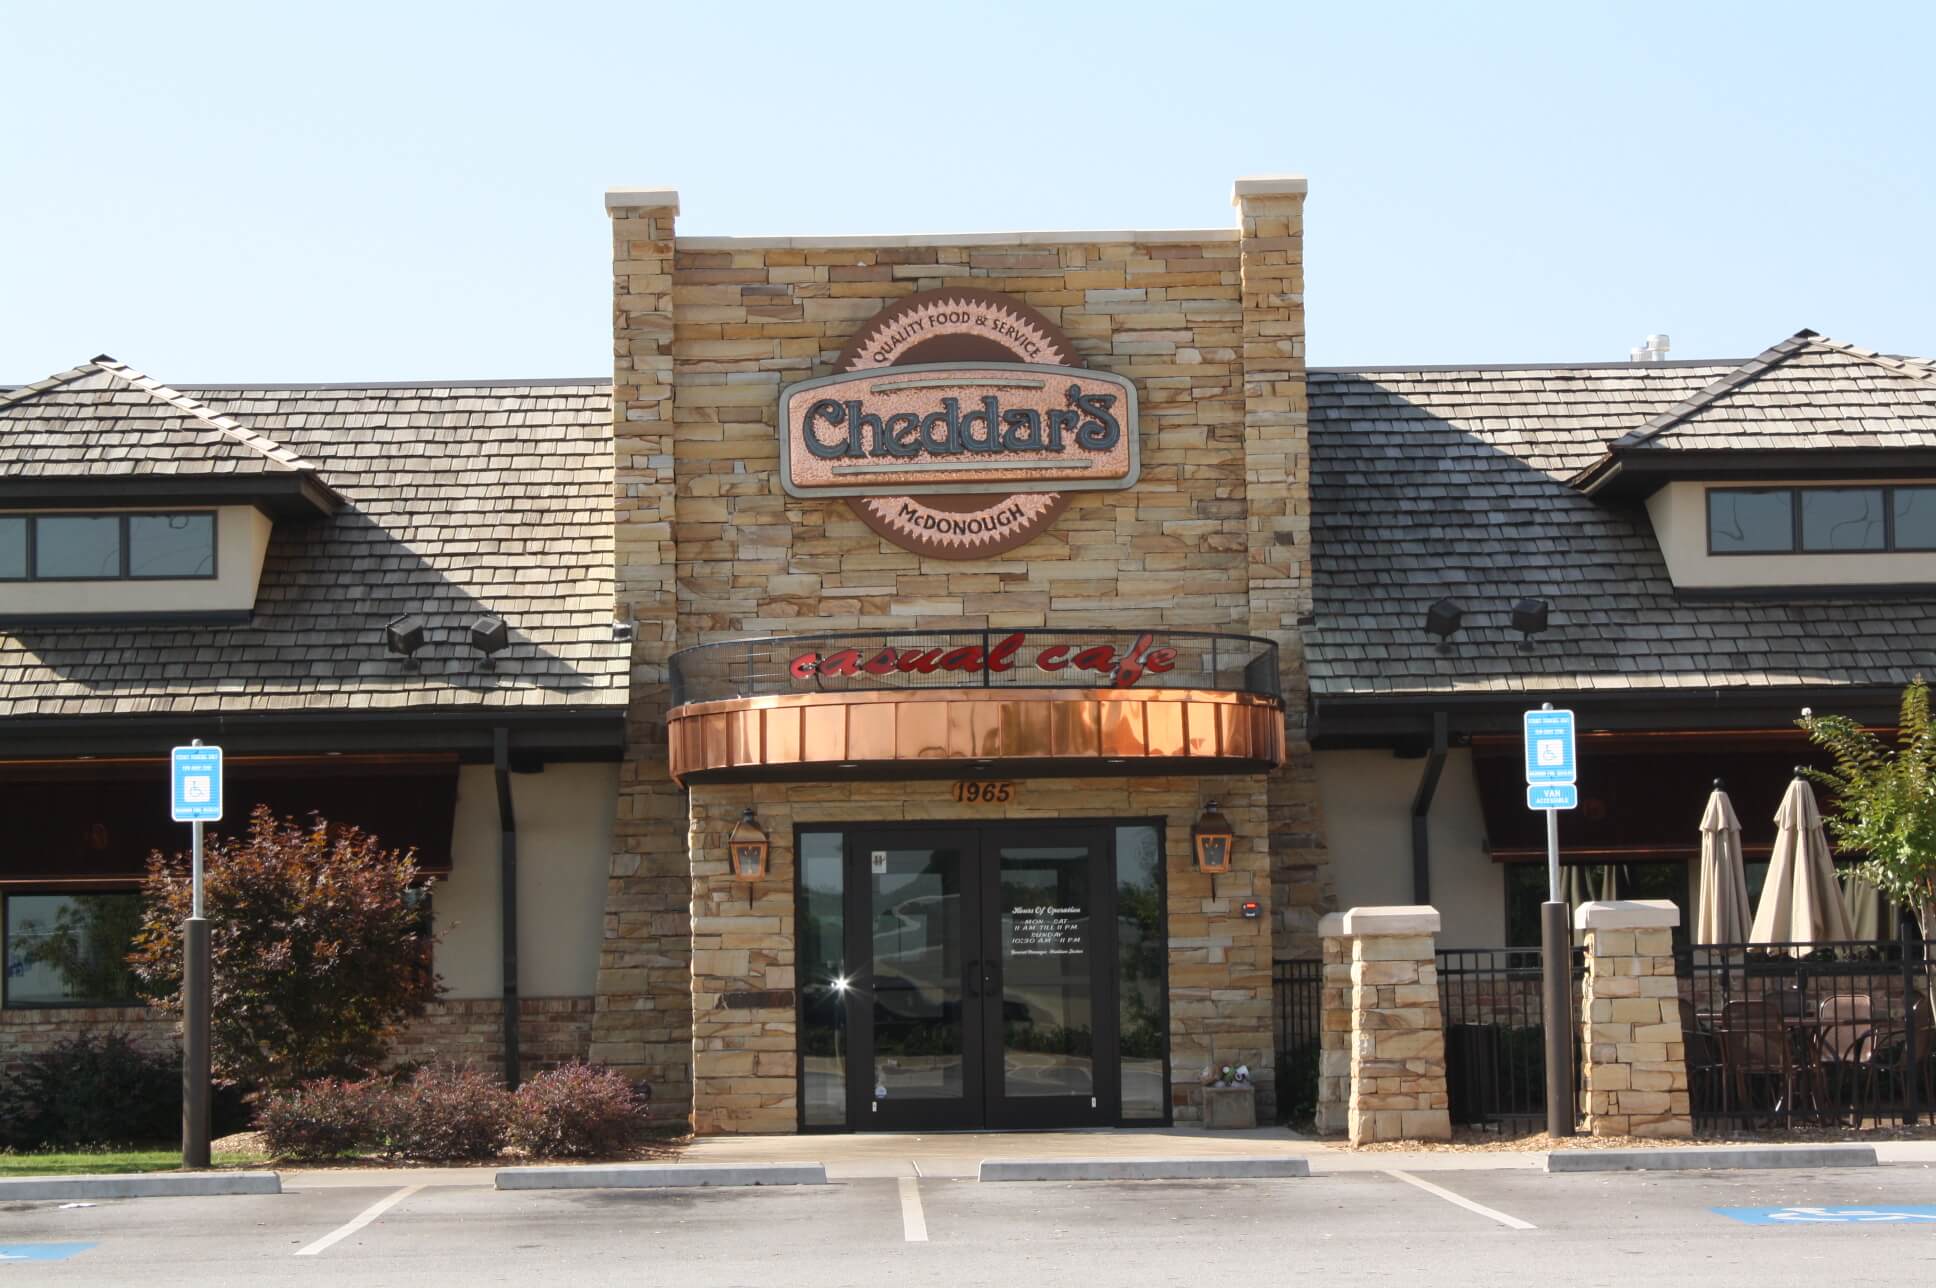 Cheddars menu prices featuring 80 items ranging from $1.49 to $19.99